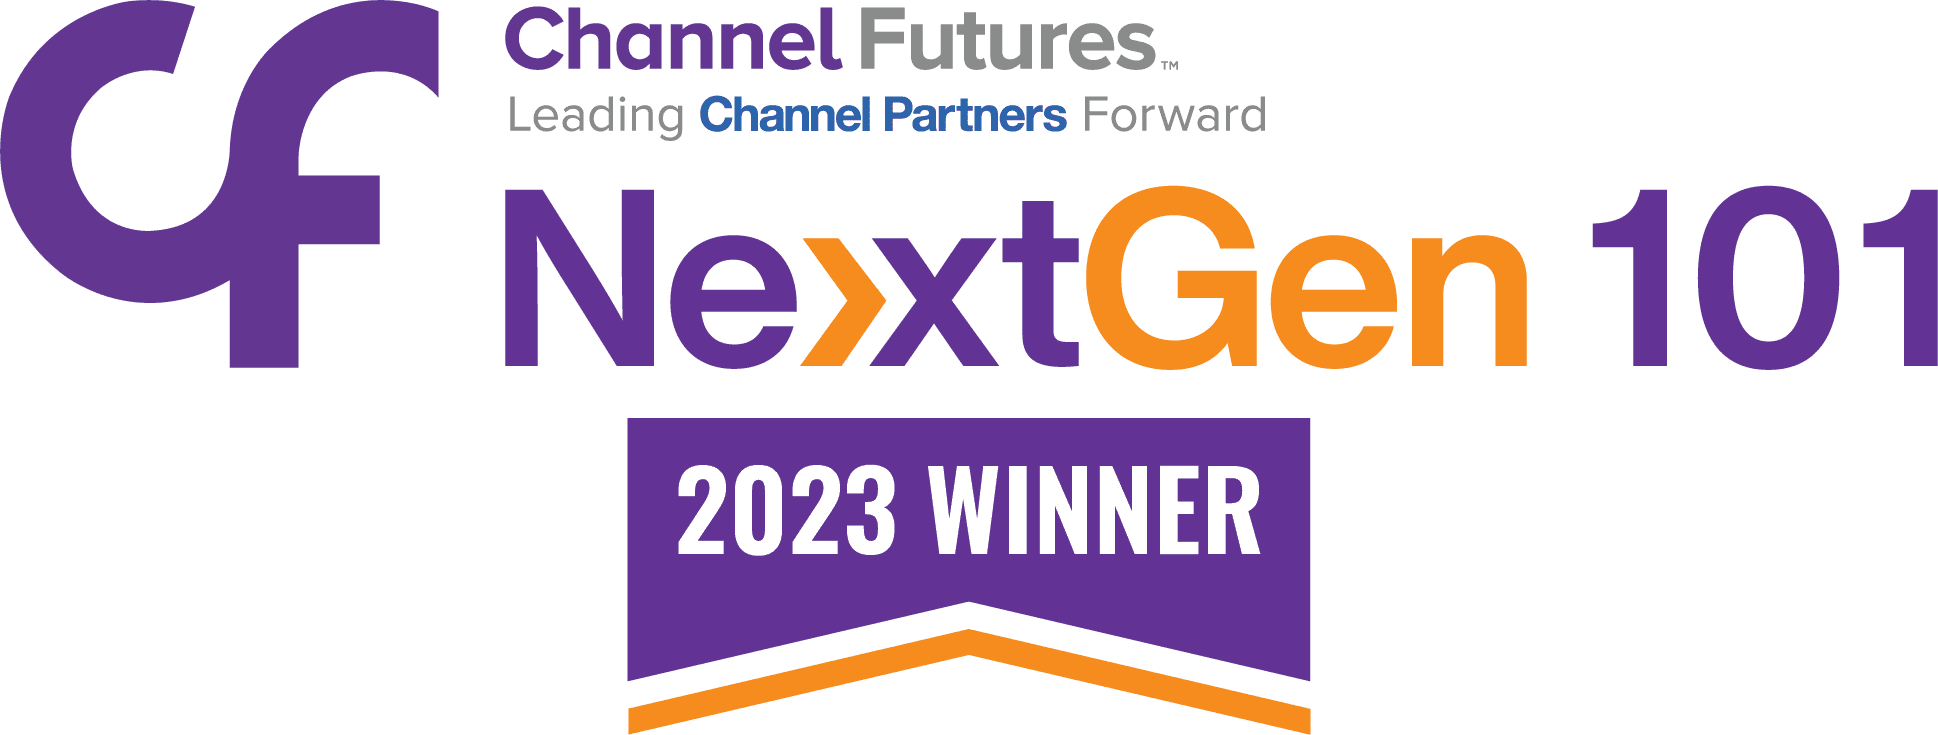 Channel Futures NextGen 2023 Winner badge for business that offers IT services.